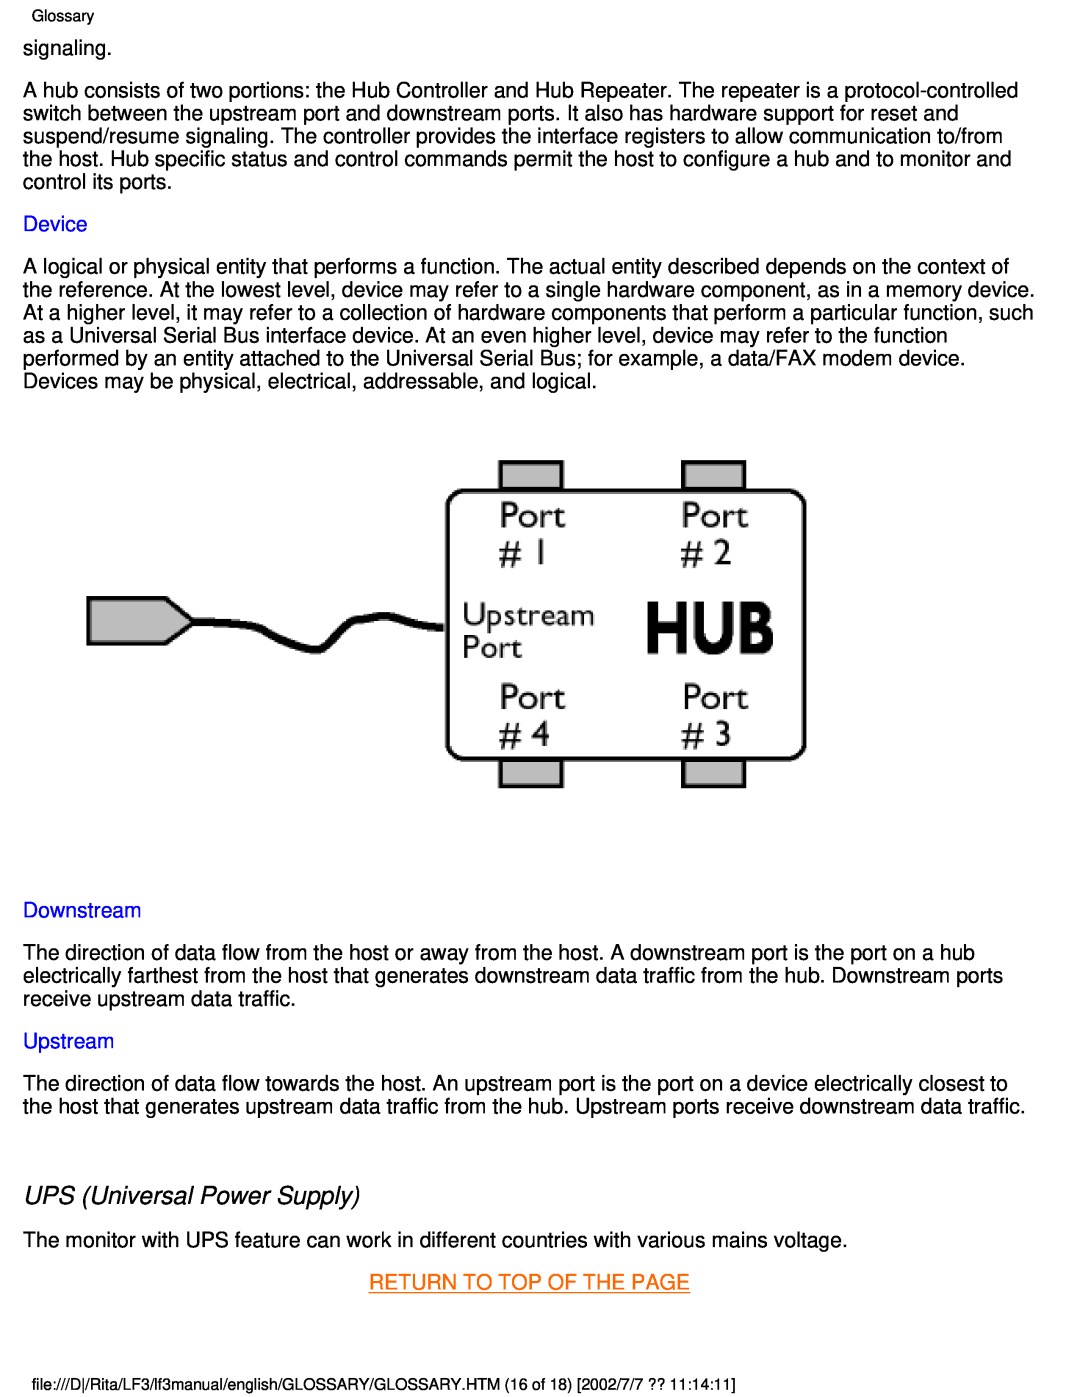 Philips 170X user manual UPS Universal Power Supply, Device, Downstream, Upstream, Return To Top Of The Page 